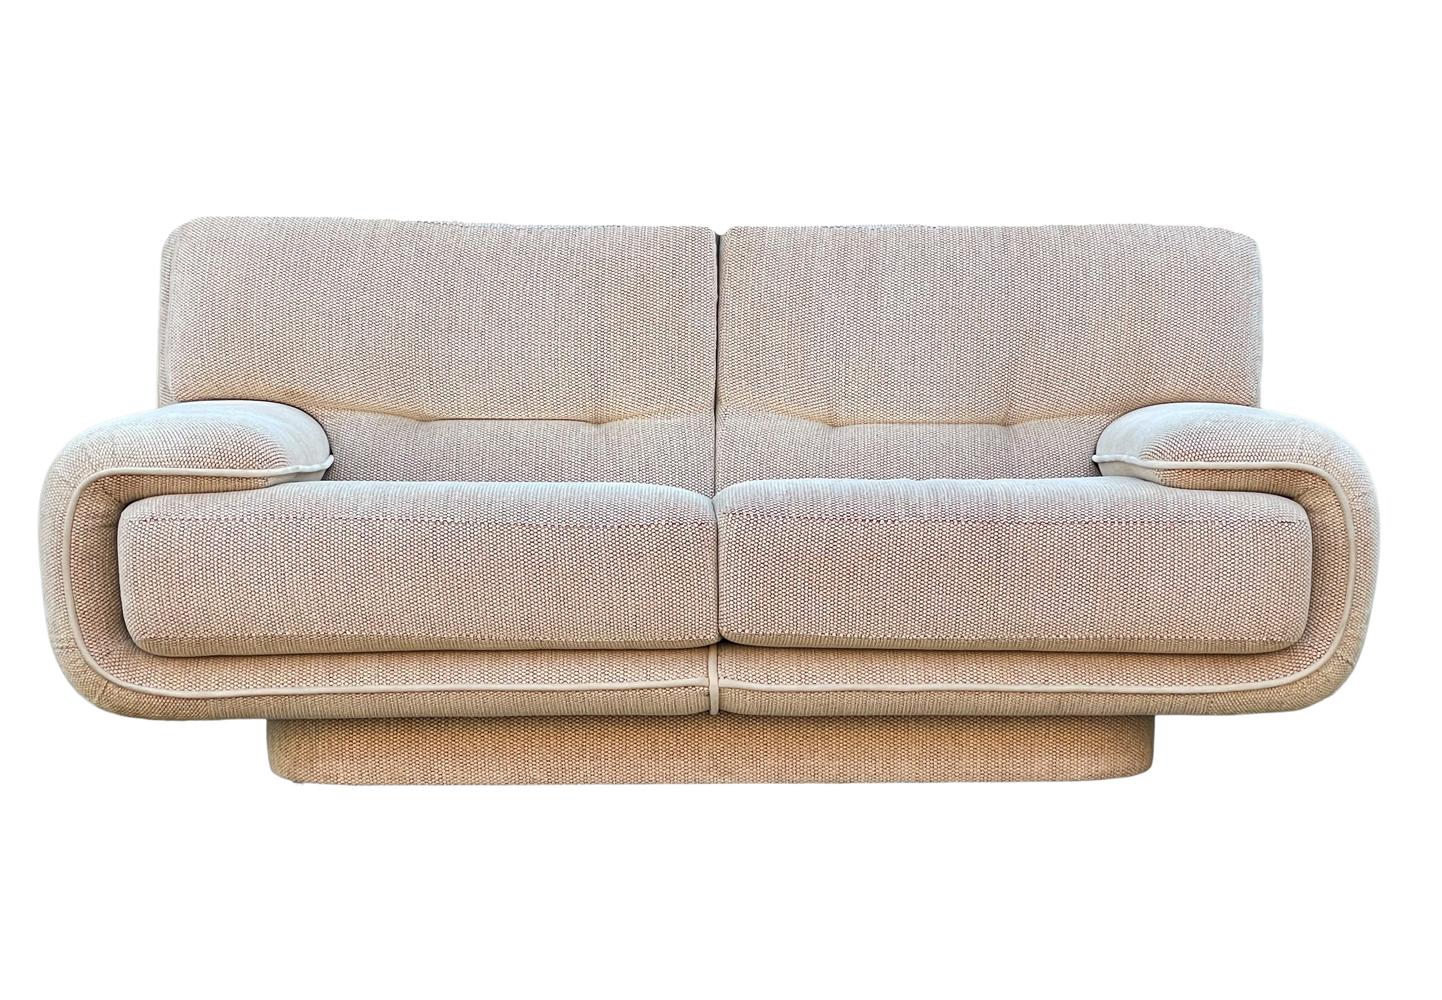 American Mid-Century Post Modern Loveseat or Sofa Produced by Preview Furniture For Sale